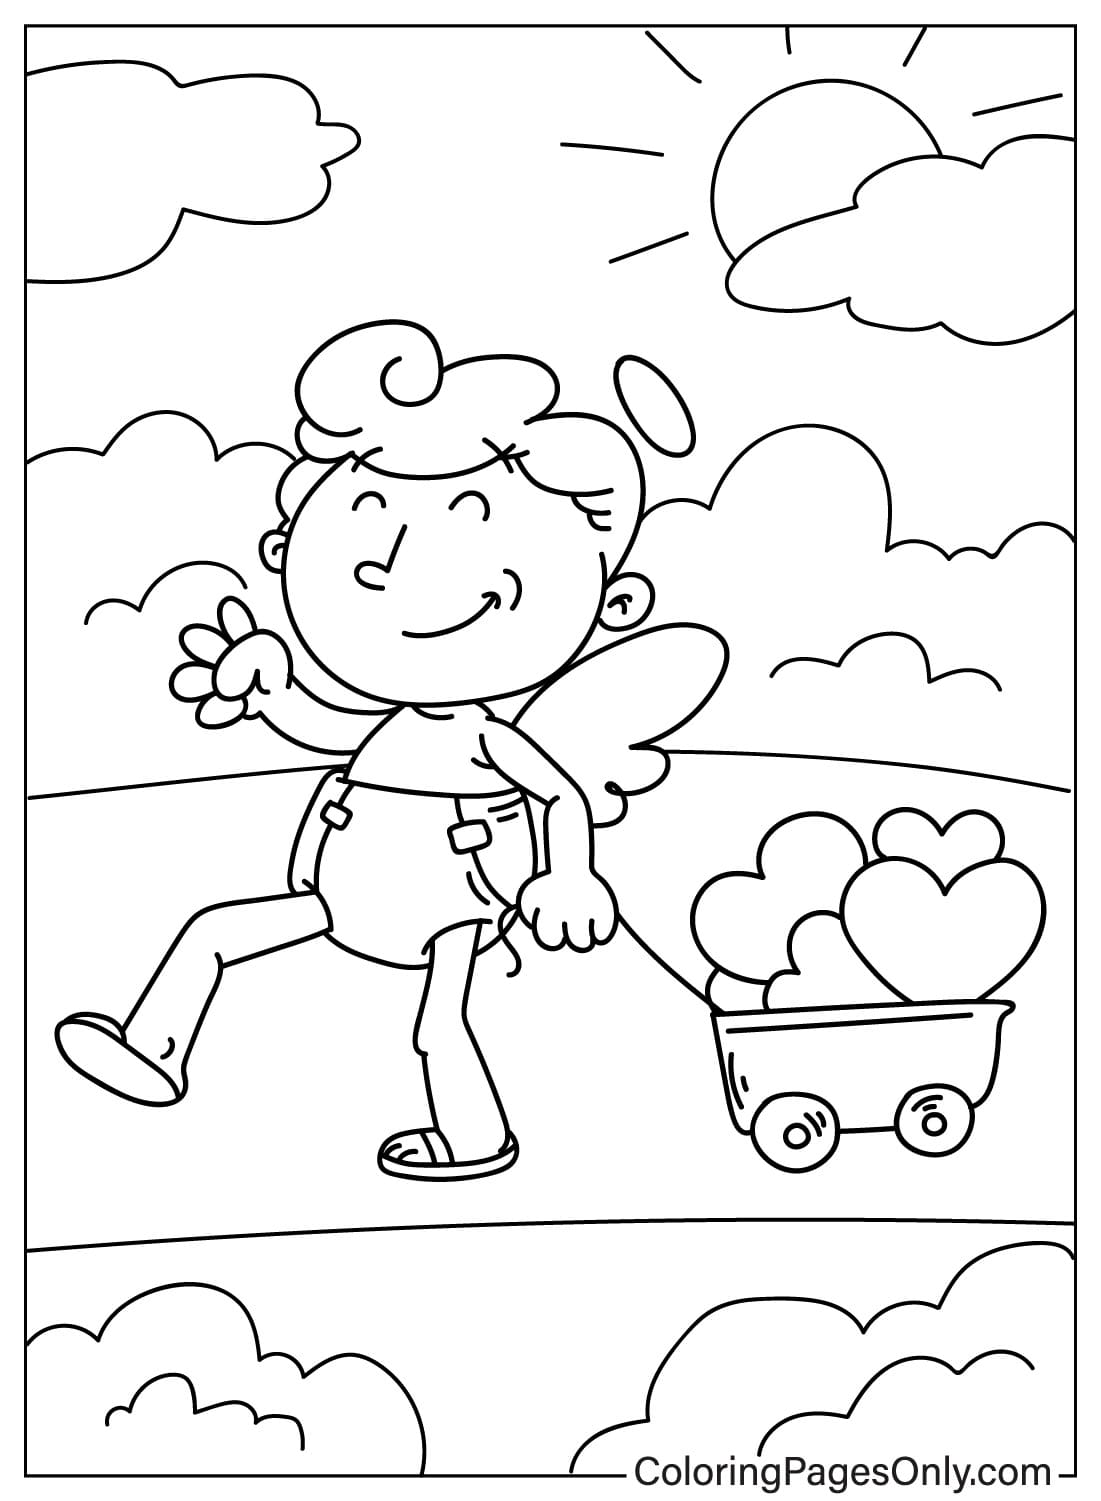 Cupid Coloring Page from Cupid